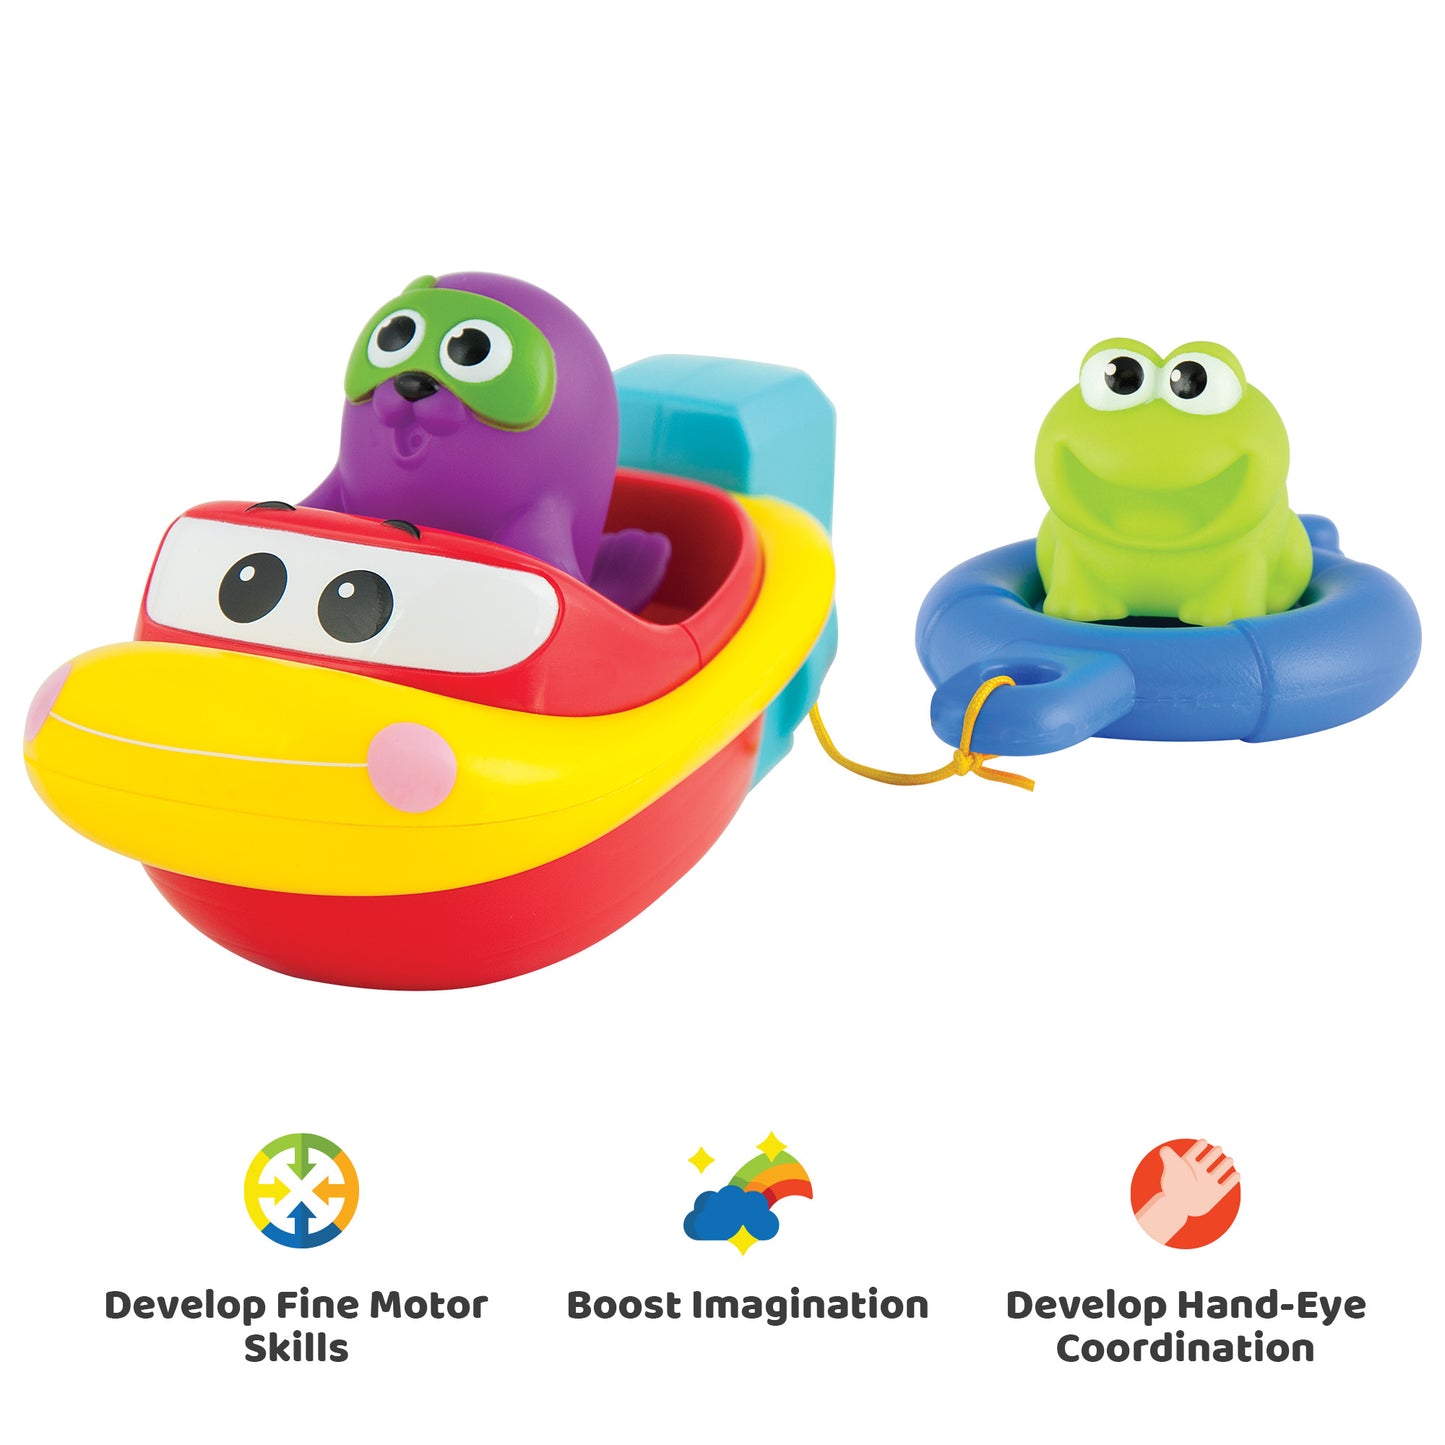 KiddoLab Bath Boat Toys for Toddlers - Pull and Go Toy Boat for Pool Playtime Floating Accessories - Bathtub Toys for 1,2,3 Years Old Babies and Kids.